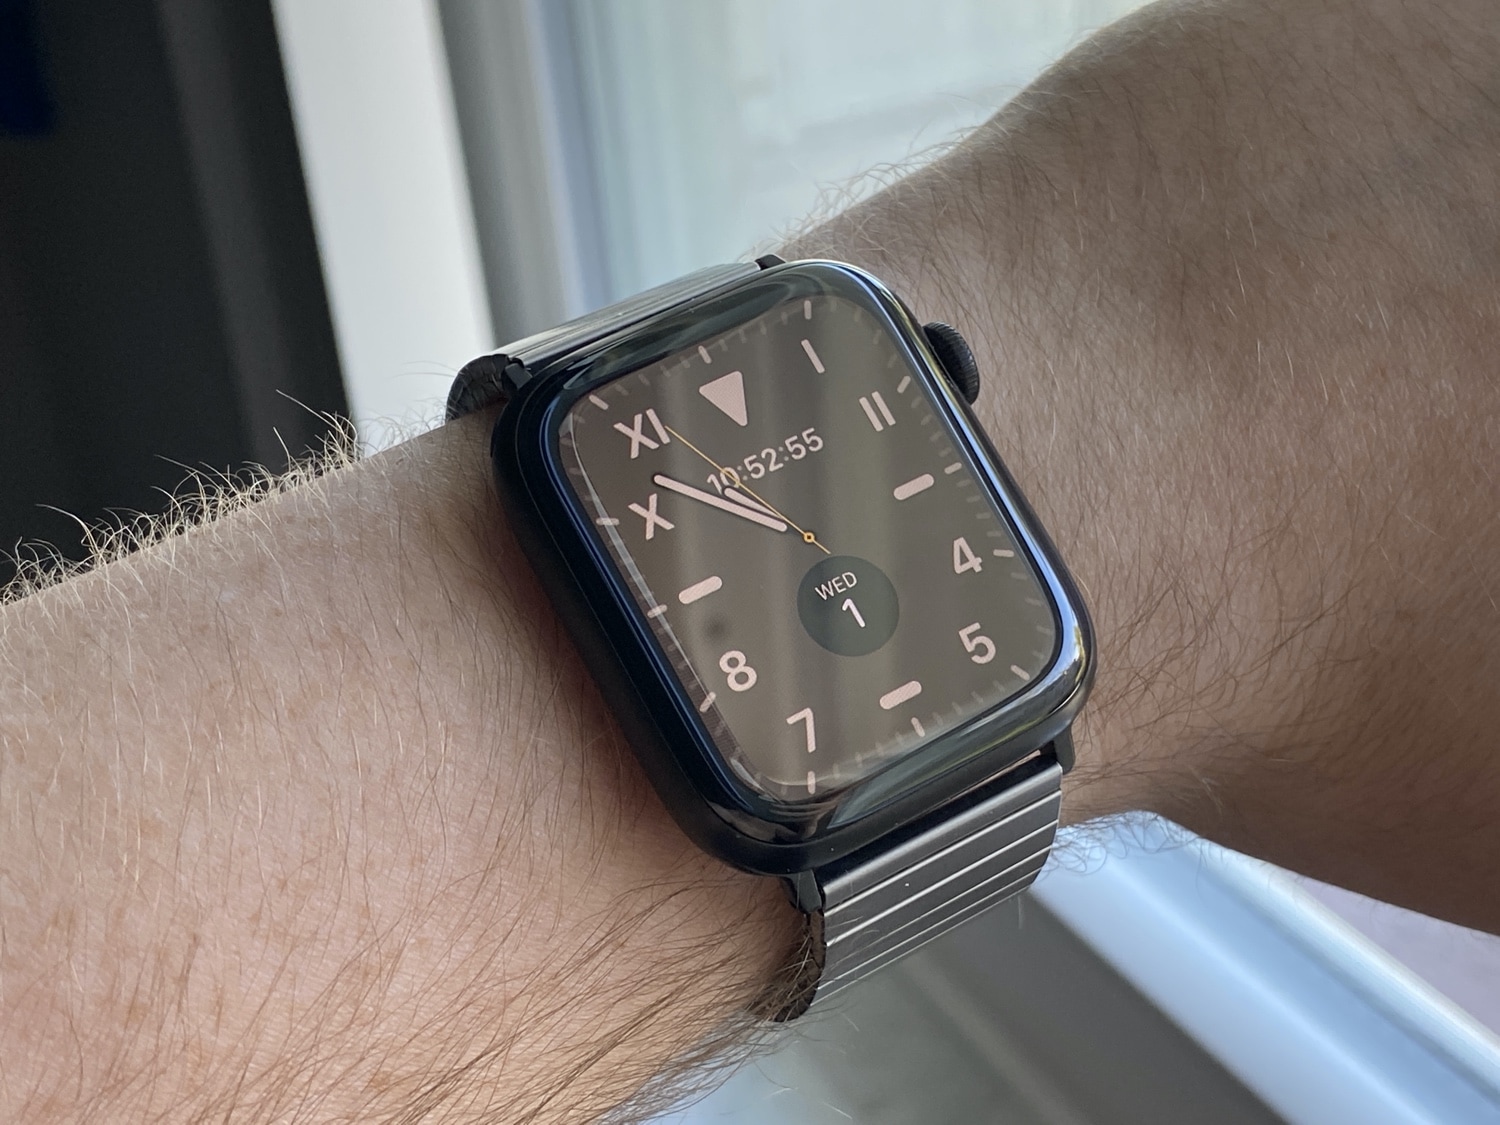 My favorite accessories for the Apple Watch Series 5